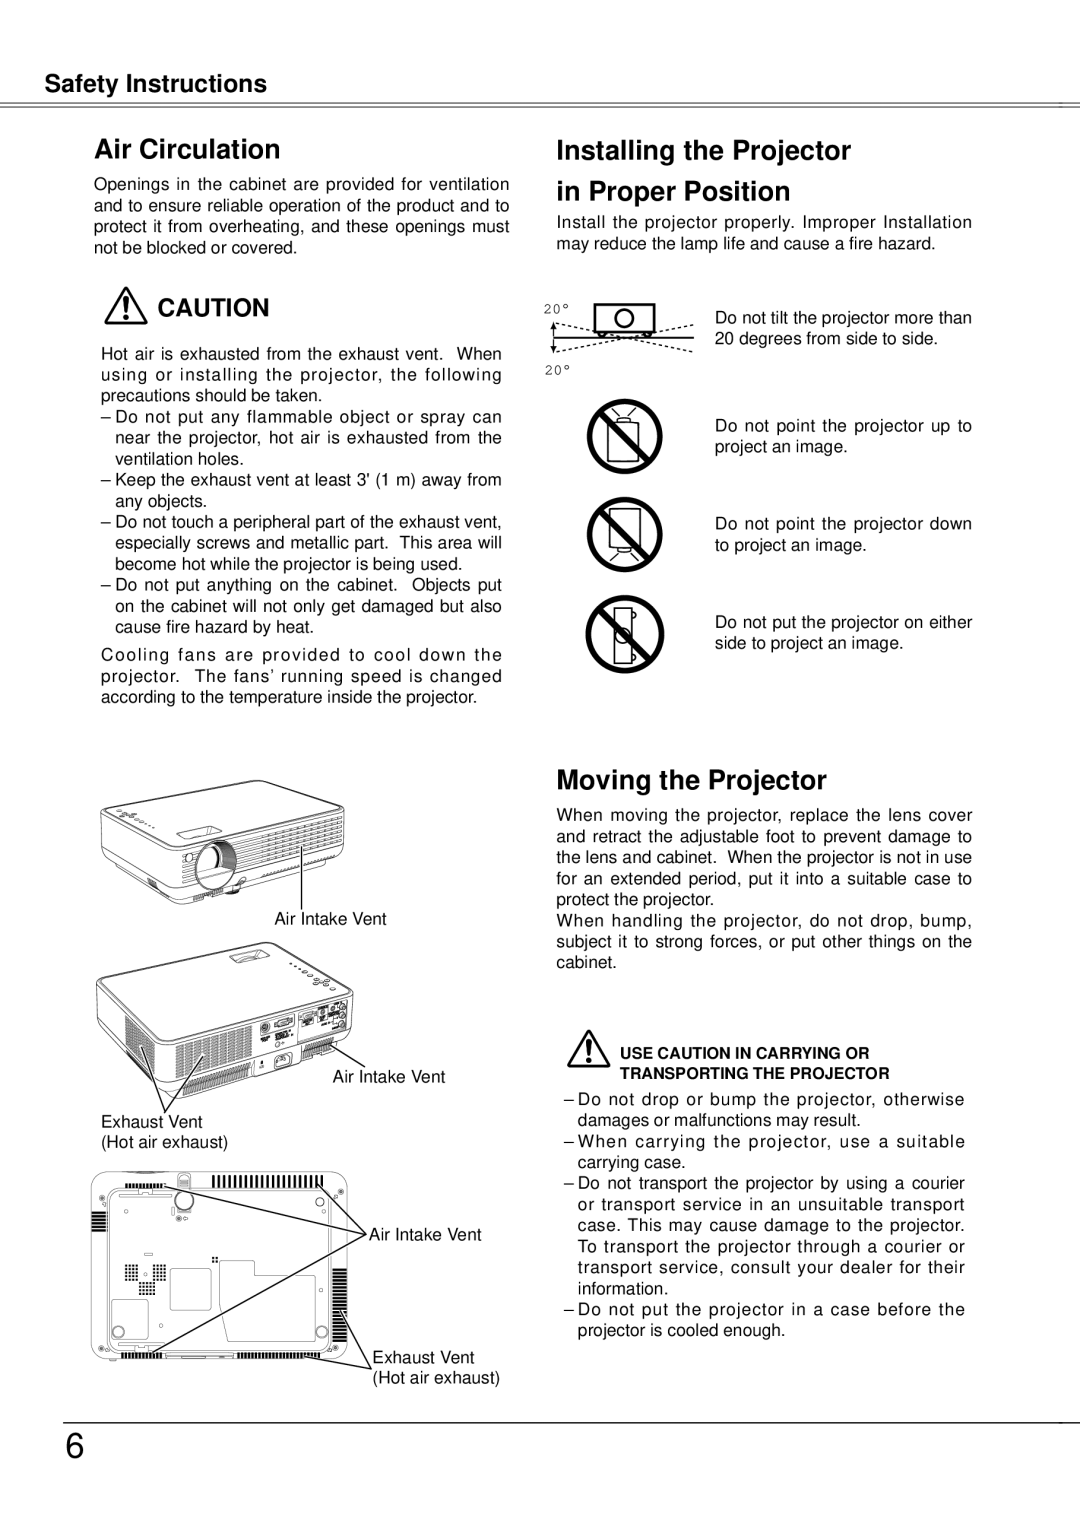 Eiki LC-XB21A Air Circulation, Installing the Projector in Proper Position, Moving the Projector, Safety Instructions 